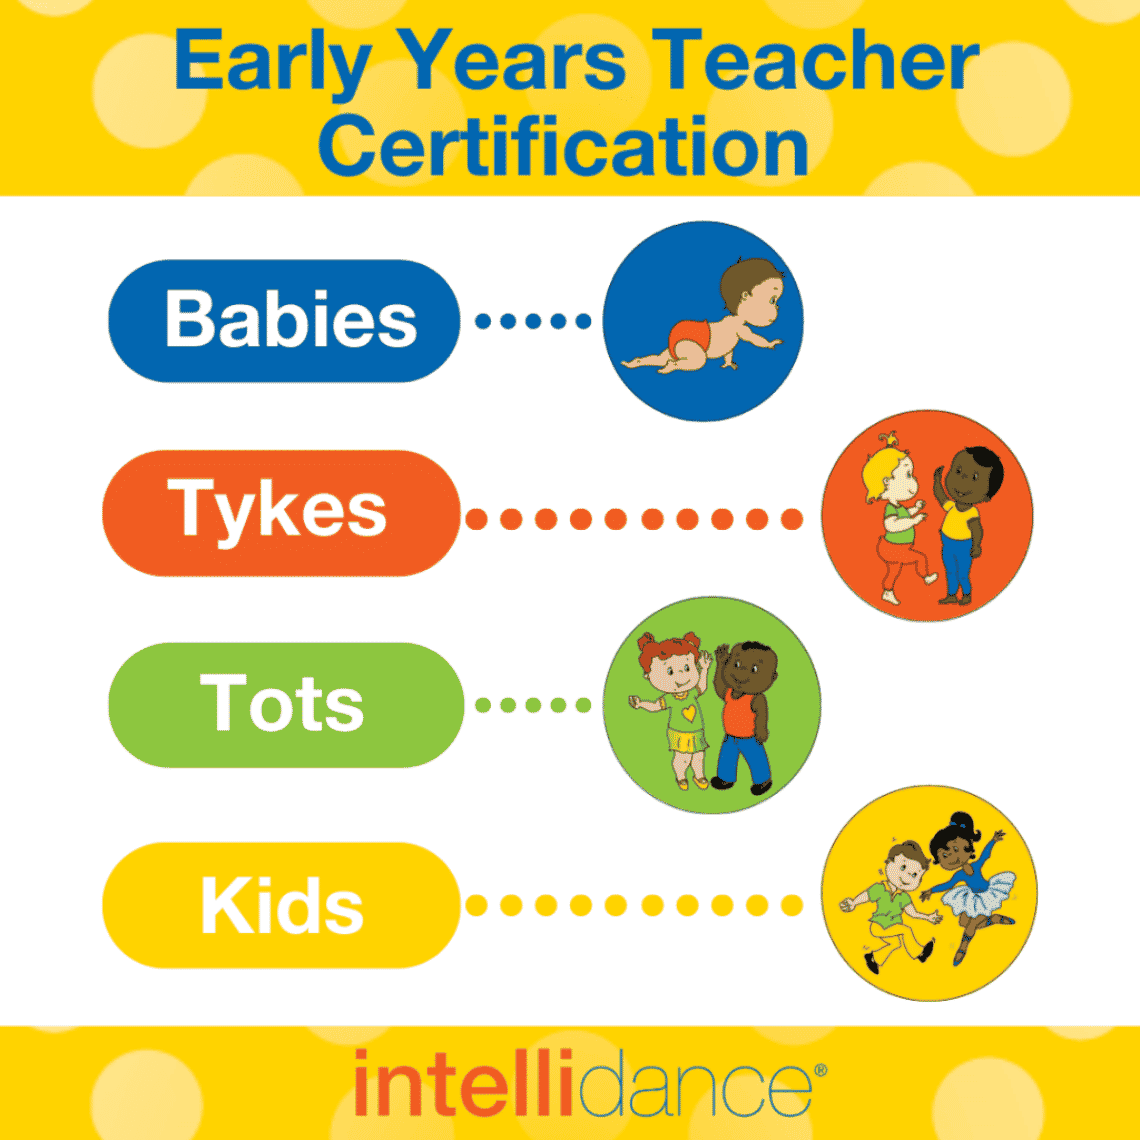 Title is Early Years Teacher Certification with cartoon images of Babies, Tykes, Tots and Kids dancing. The Intellidance logo is on the bottom.